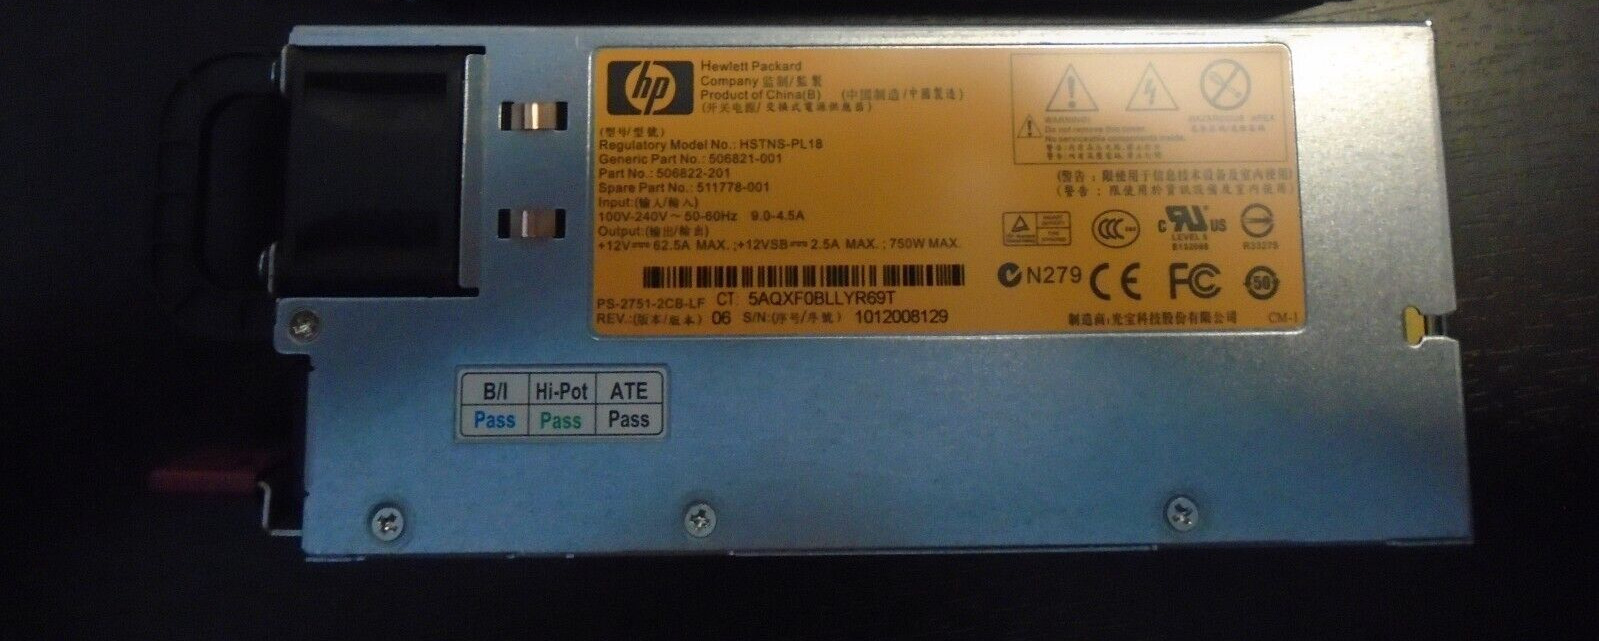 HP 750W Server Power Supply Model HSTNS-PL18. Used and tested